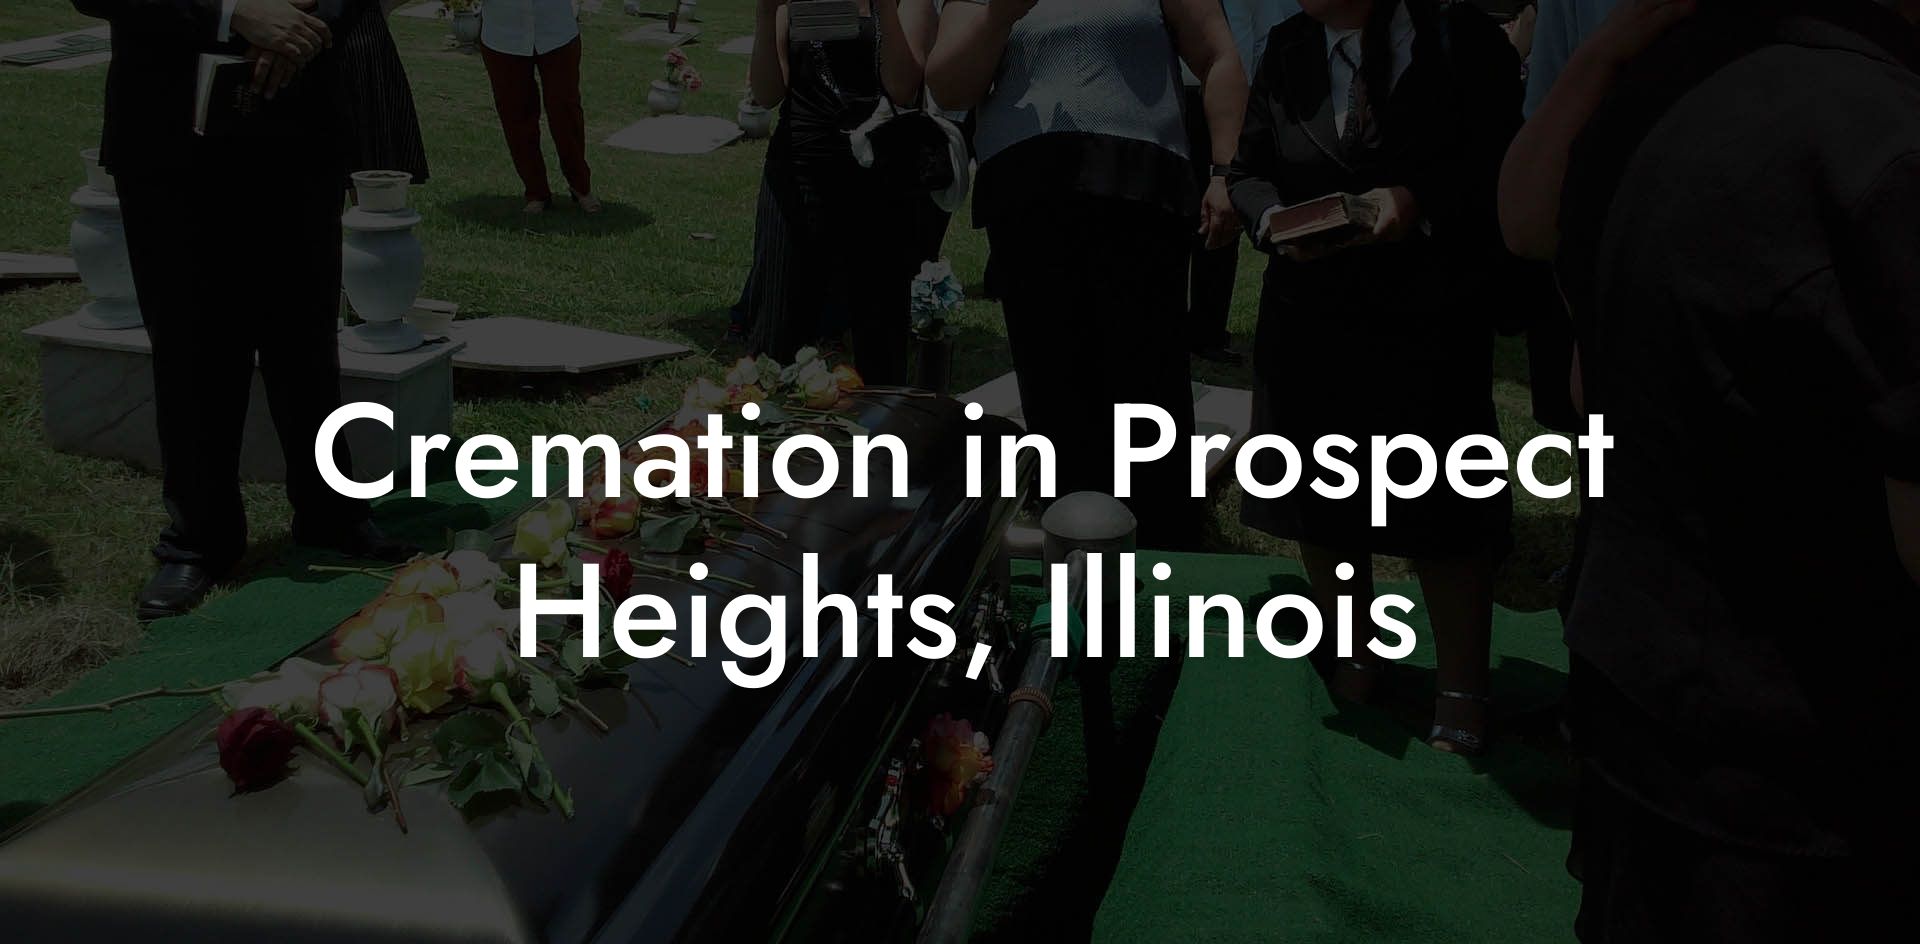 Cremation in Prospect Heights, Illinois